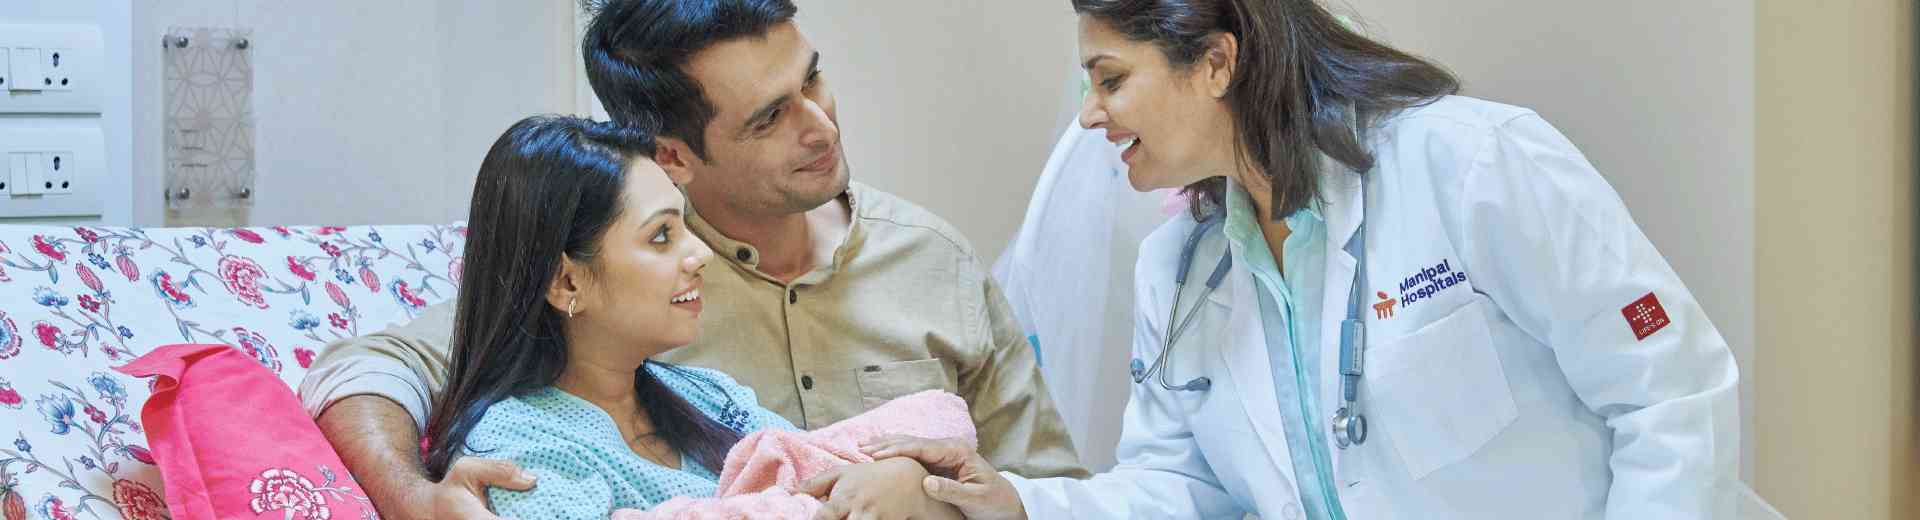 Post Natal Care for Mother and New Born Baby in Salt Lake